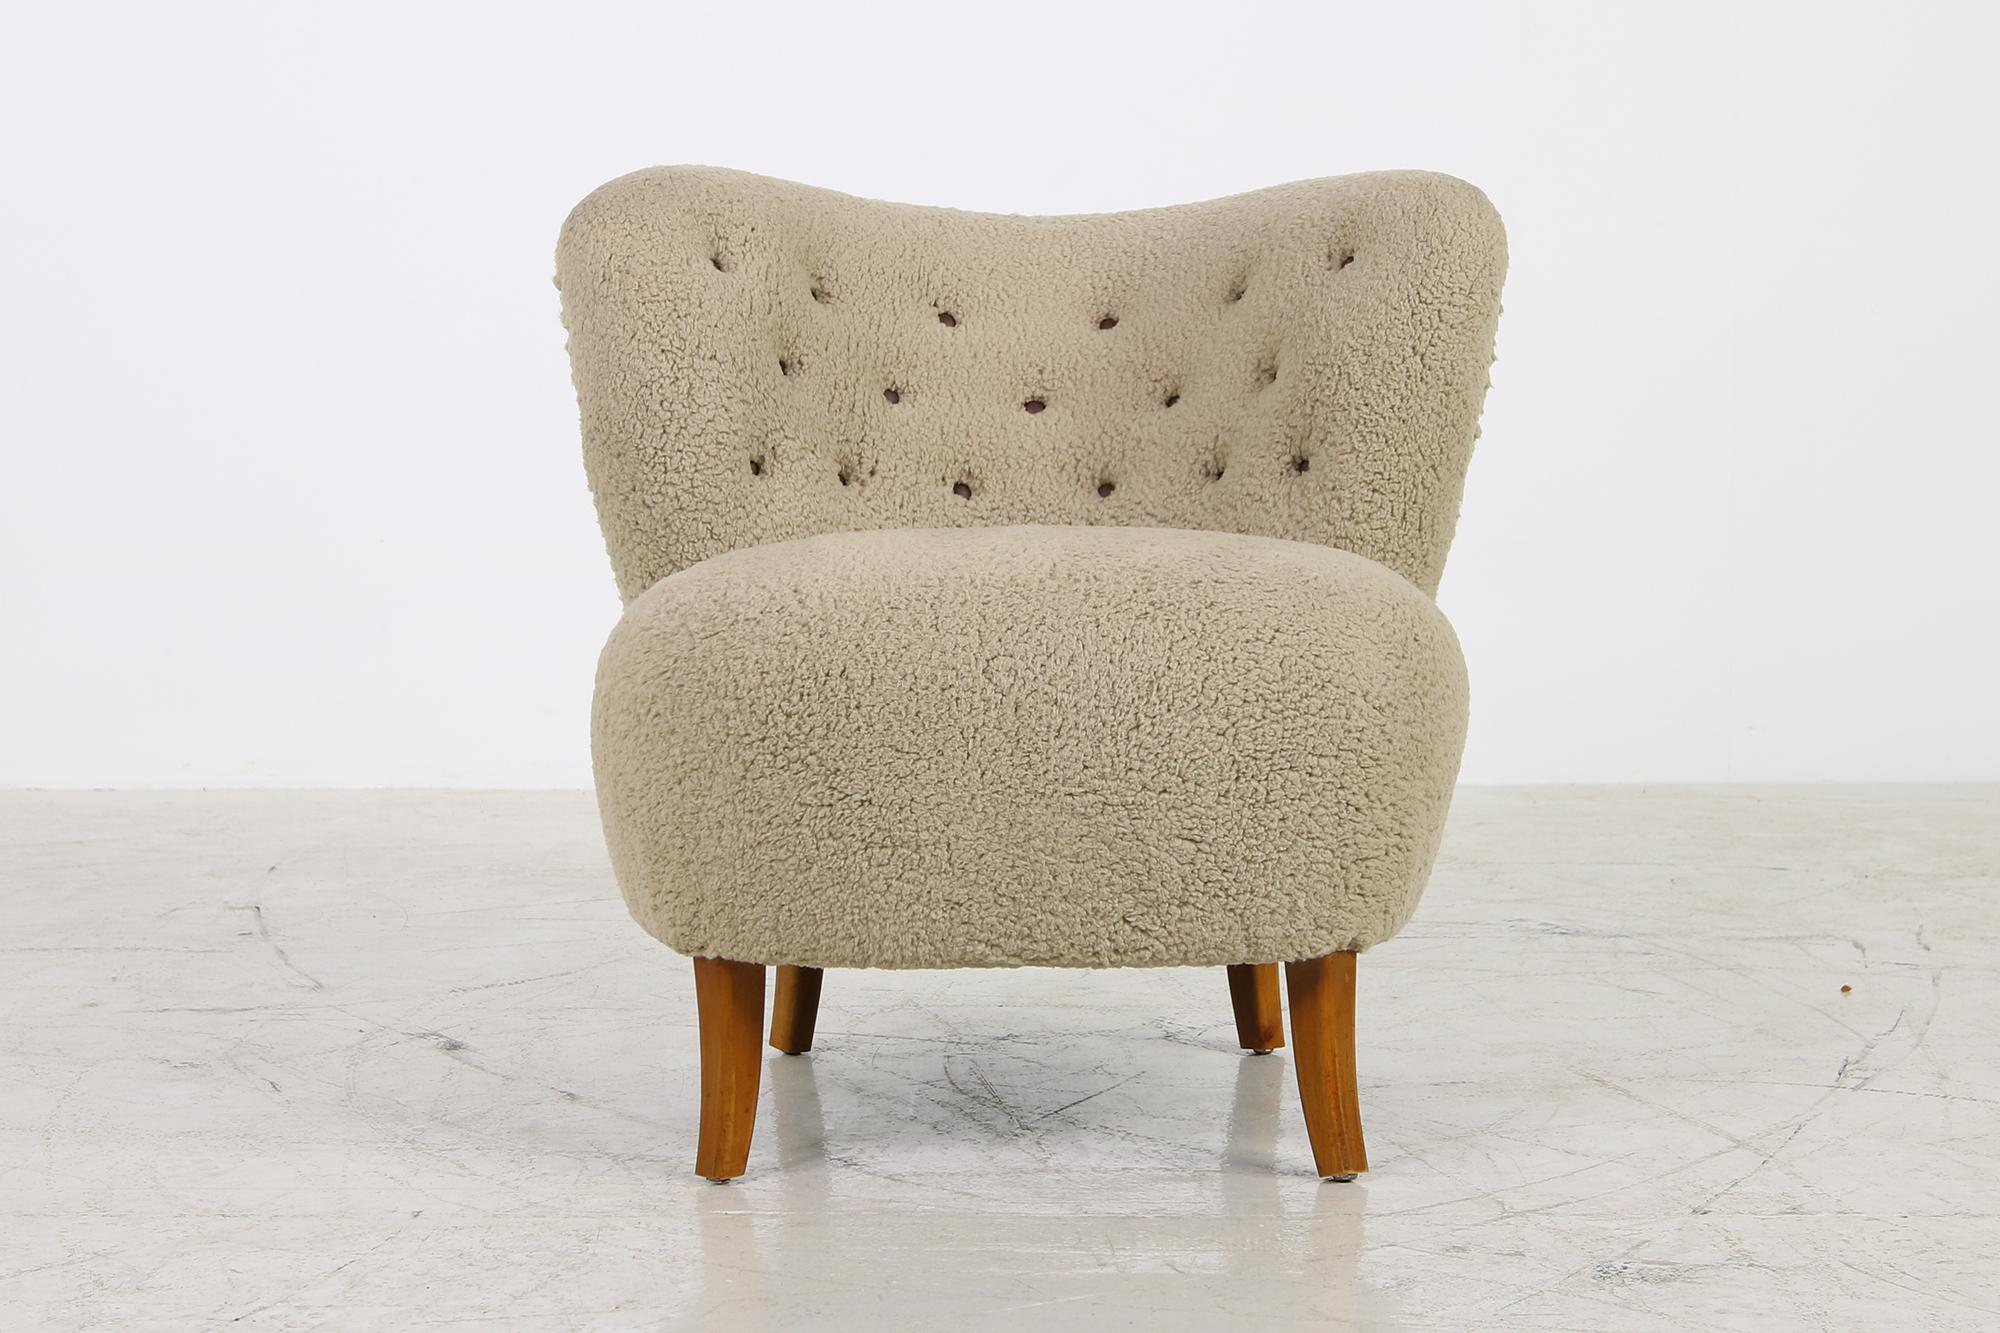 Beautiful 1950s lounge chair design attrib. to Gösta Jonsson, Jönköping Sweden, very rare piece, beechwood legs, new upholstery and covered with a teddy faux fur fabric, super soft cotton fur, tufted with beautiful dark brown leather buttons,